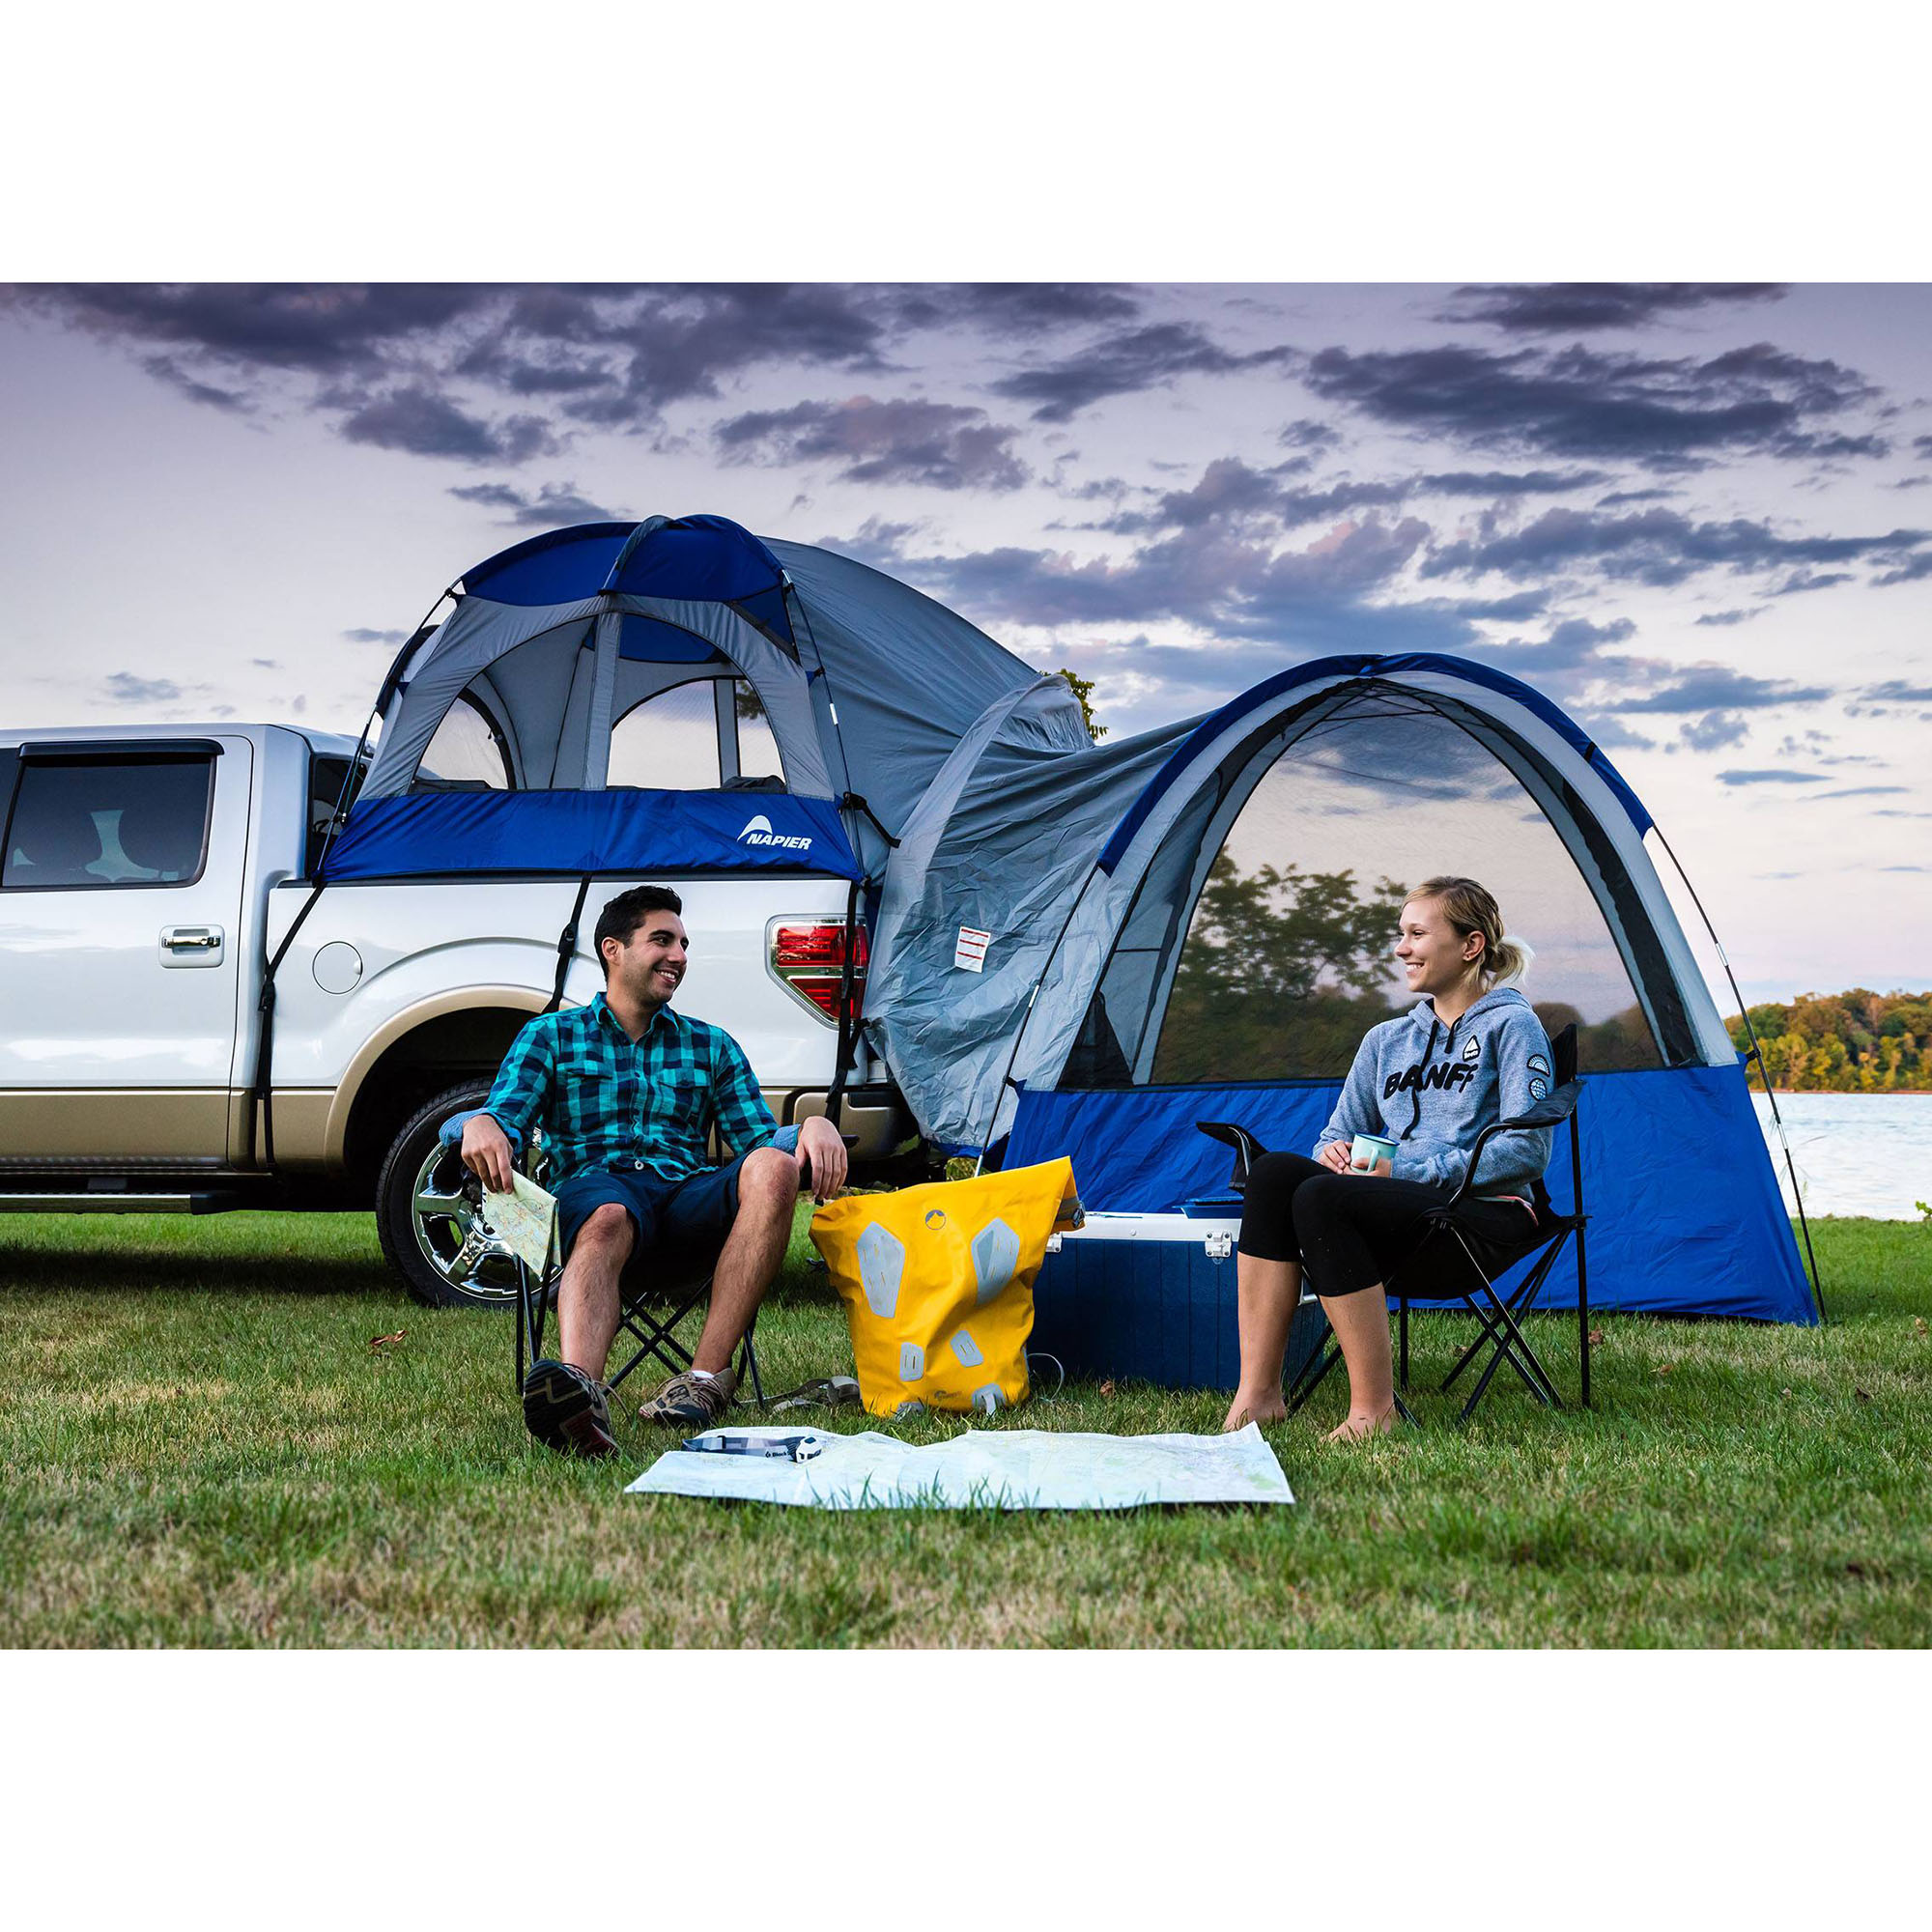 Napier Sportz Link Portable 4 Person Truck Bed Attachment Camping Tent, Blue - image 3 of 6